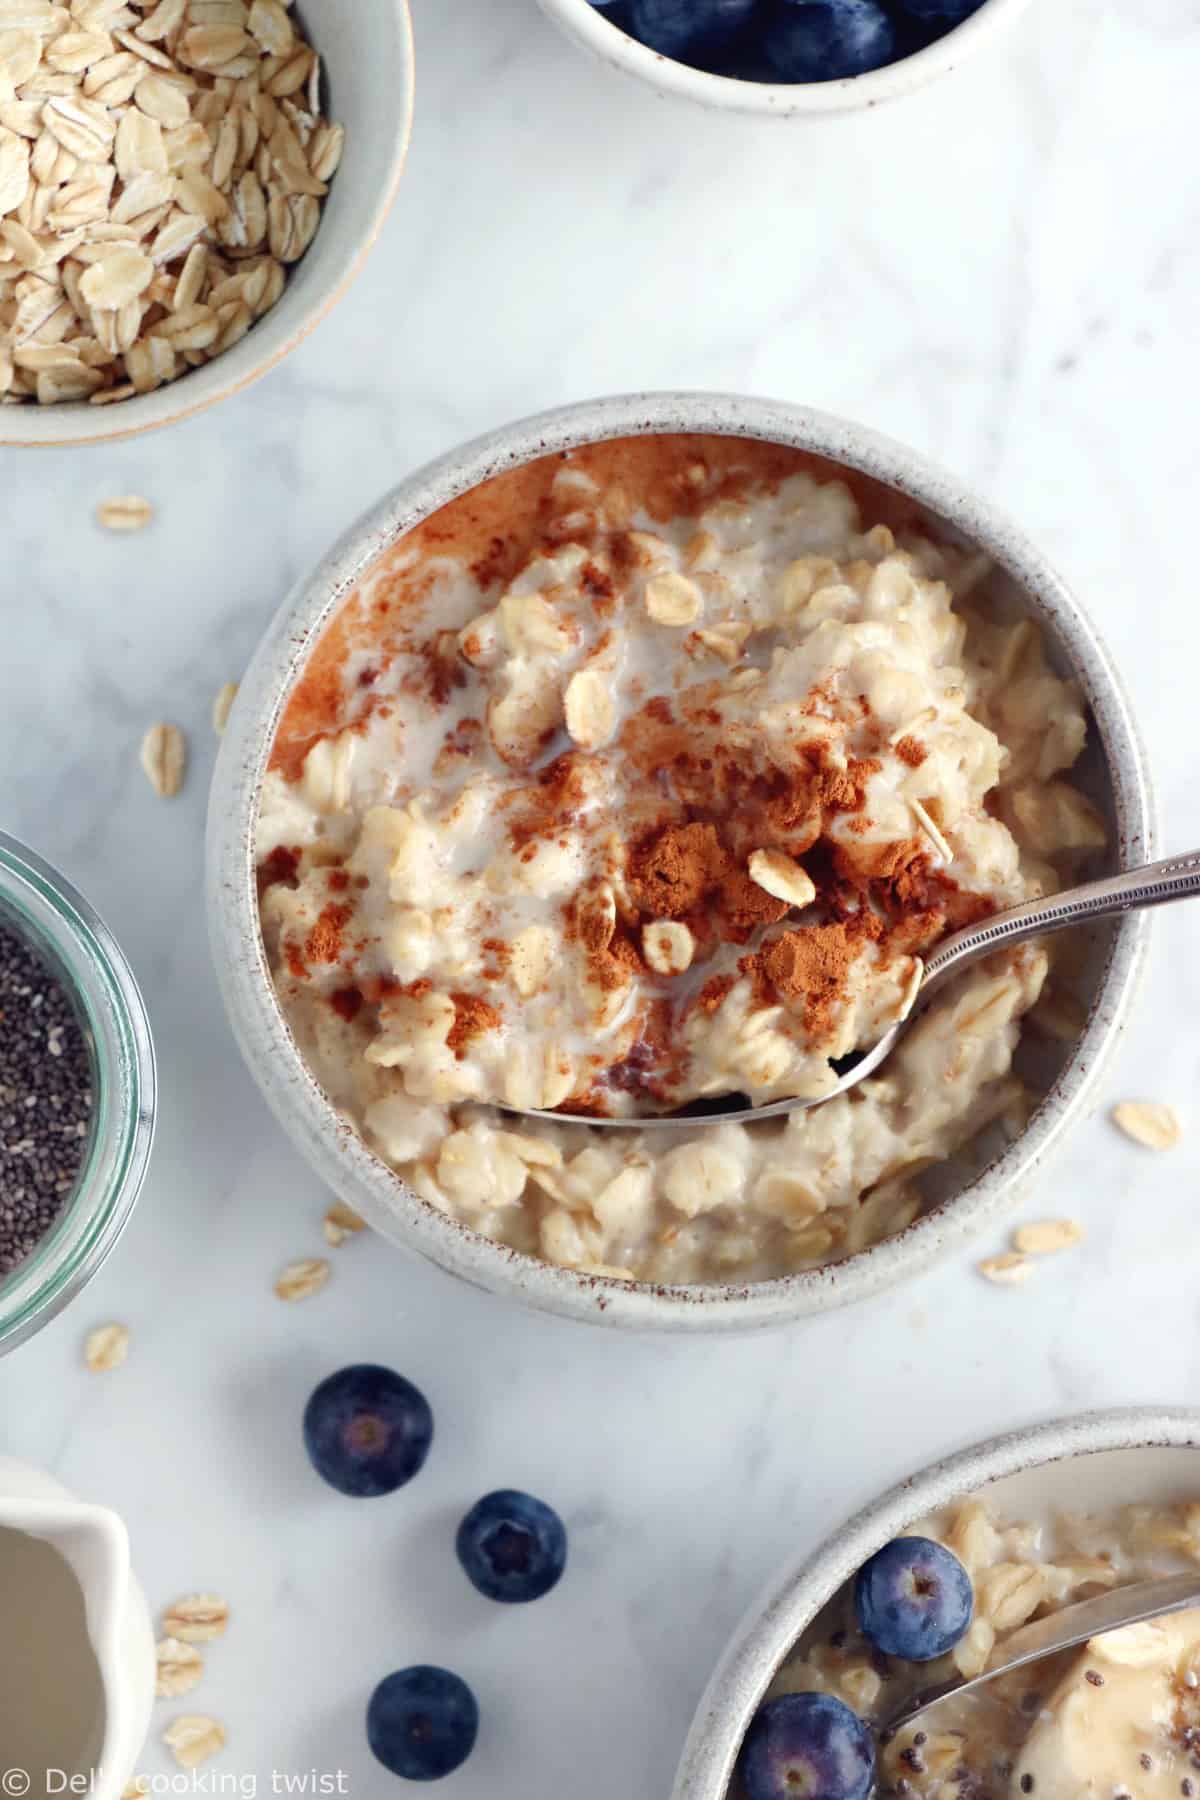 Learn how to make oatmeal from scratch with just 2 simple ingredients and discover all the tips and tricks to master the oatmeal technique. Loaded with fiber, oatmeal makes a satisfying healthy breakfast for busy days.